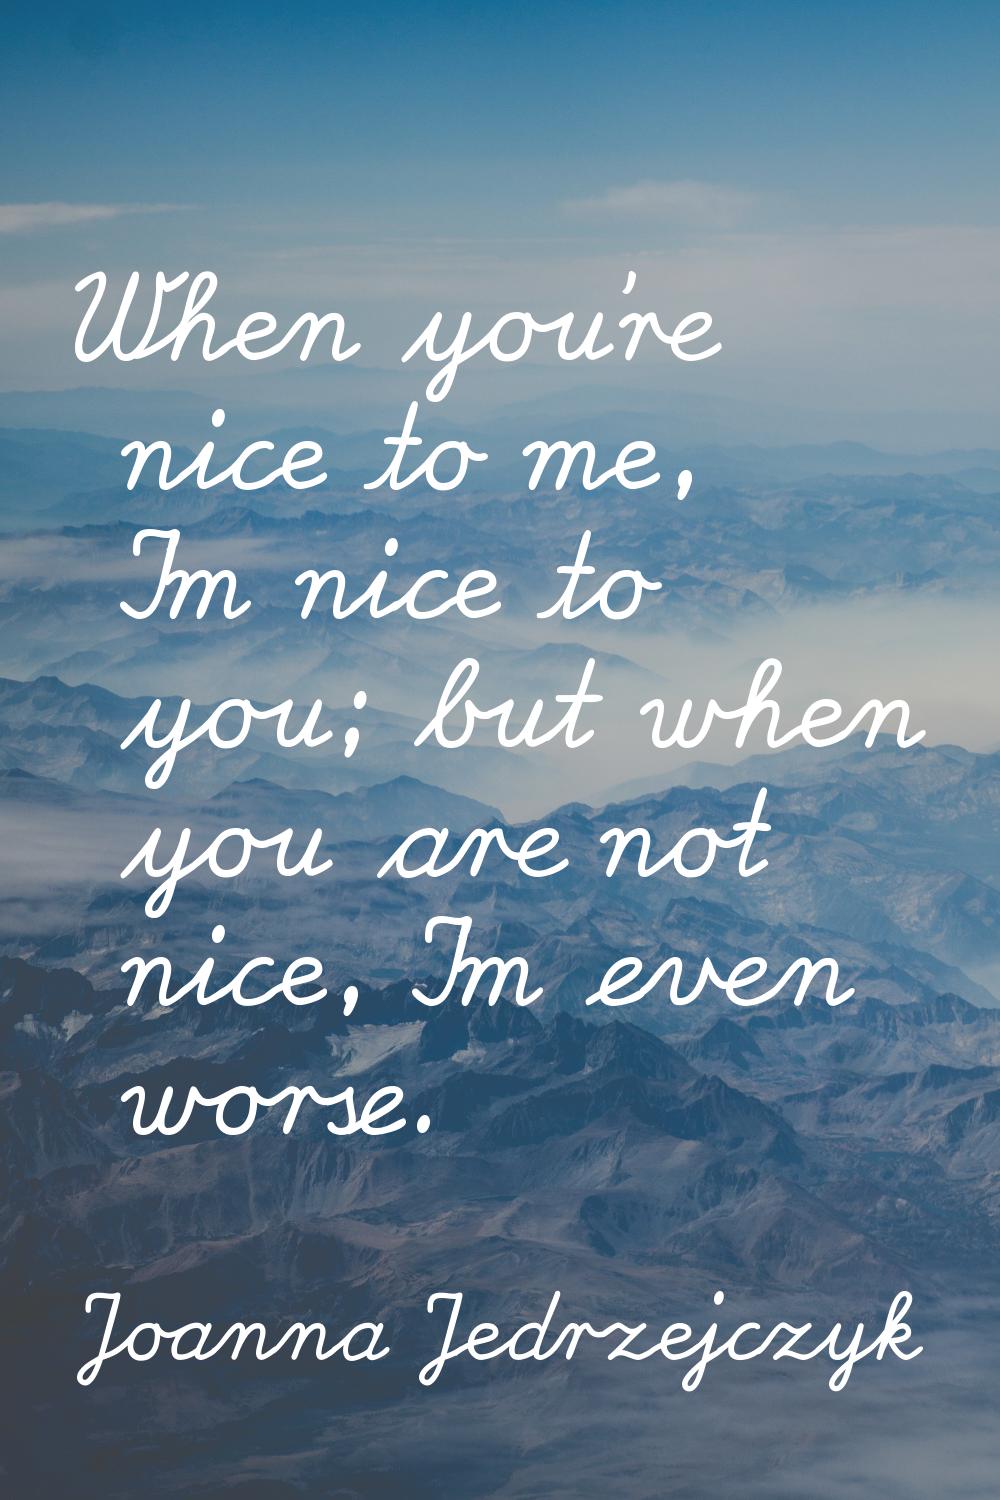 When you're nice to me, I'm nice to you; but when you are not nice, I'm even worse.